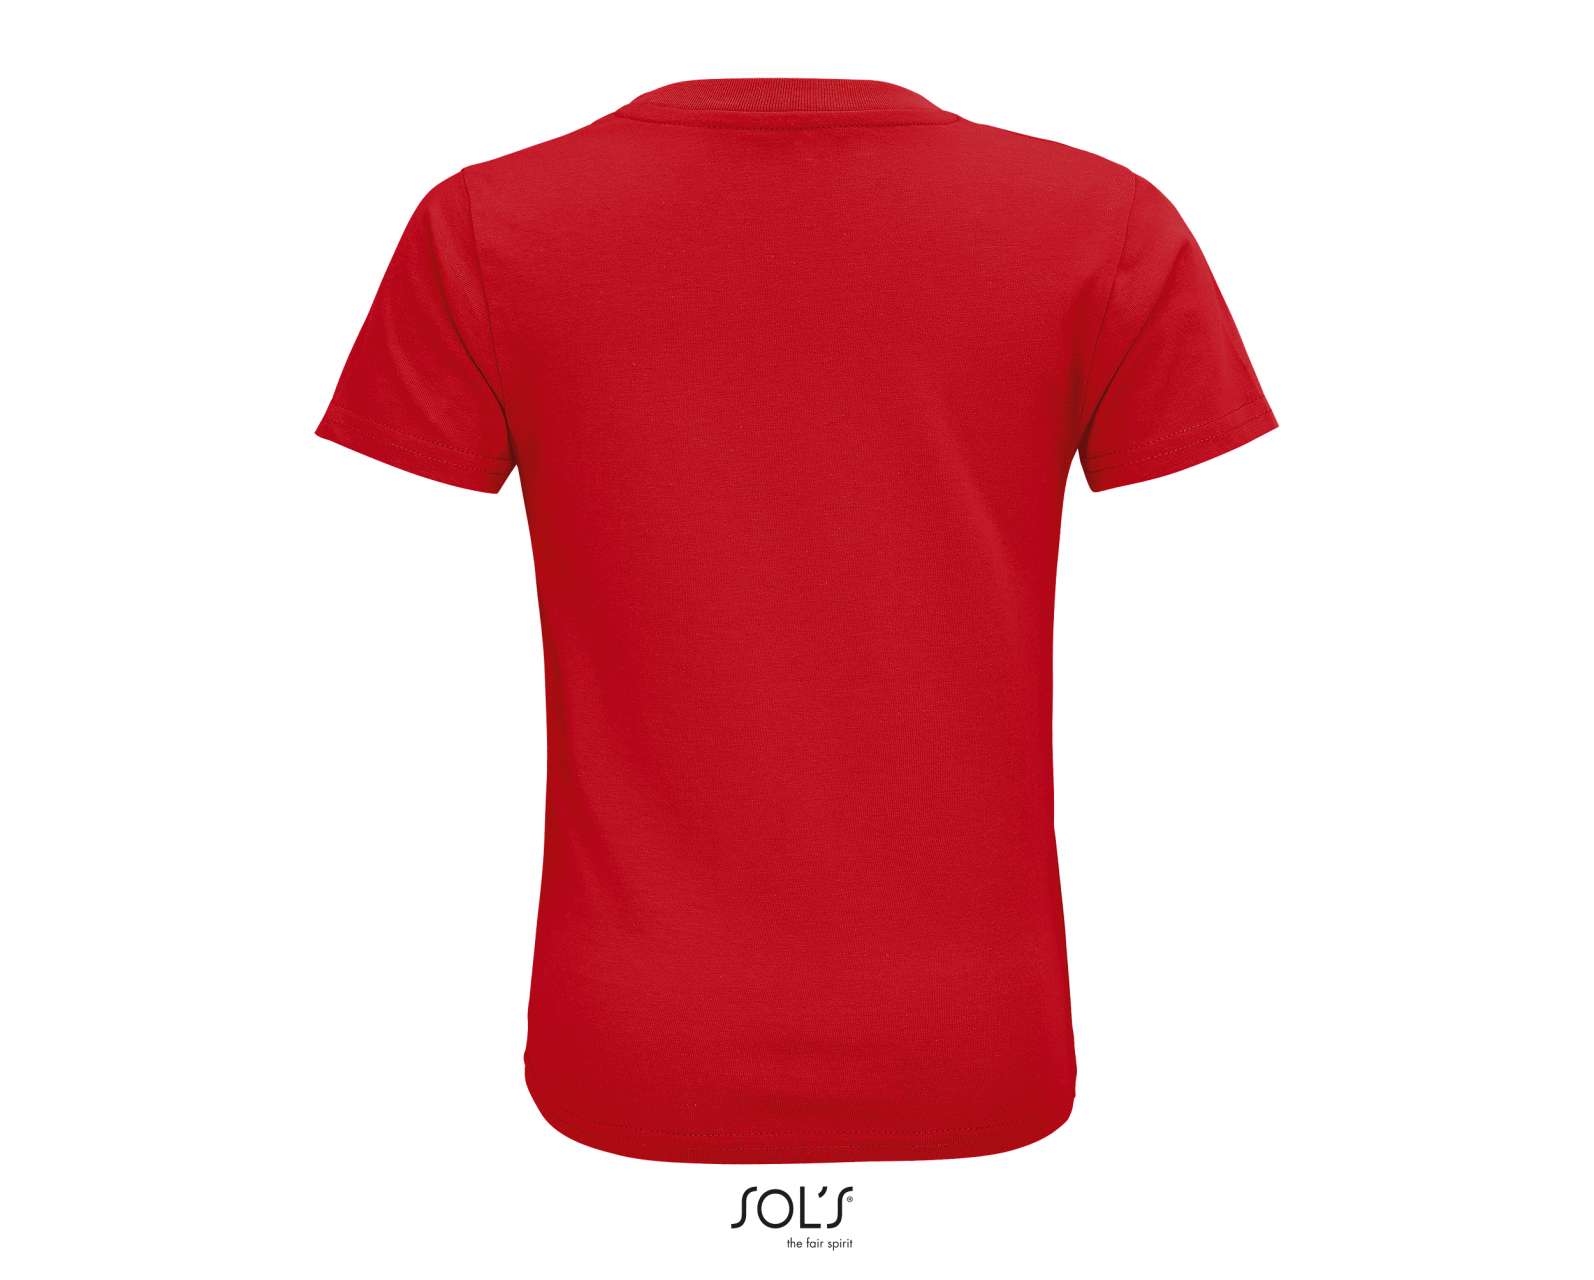 SOL'S CRUSADER KIDS - ROUND-NECK FITTED JERSEY T-SHIRT